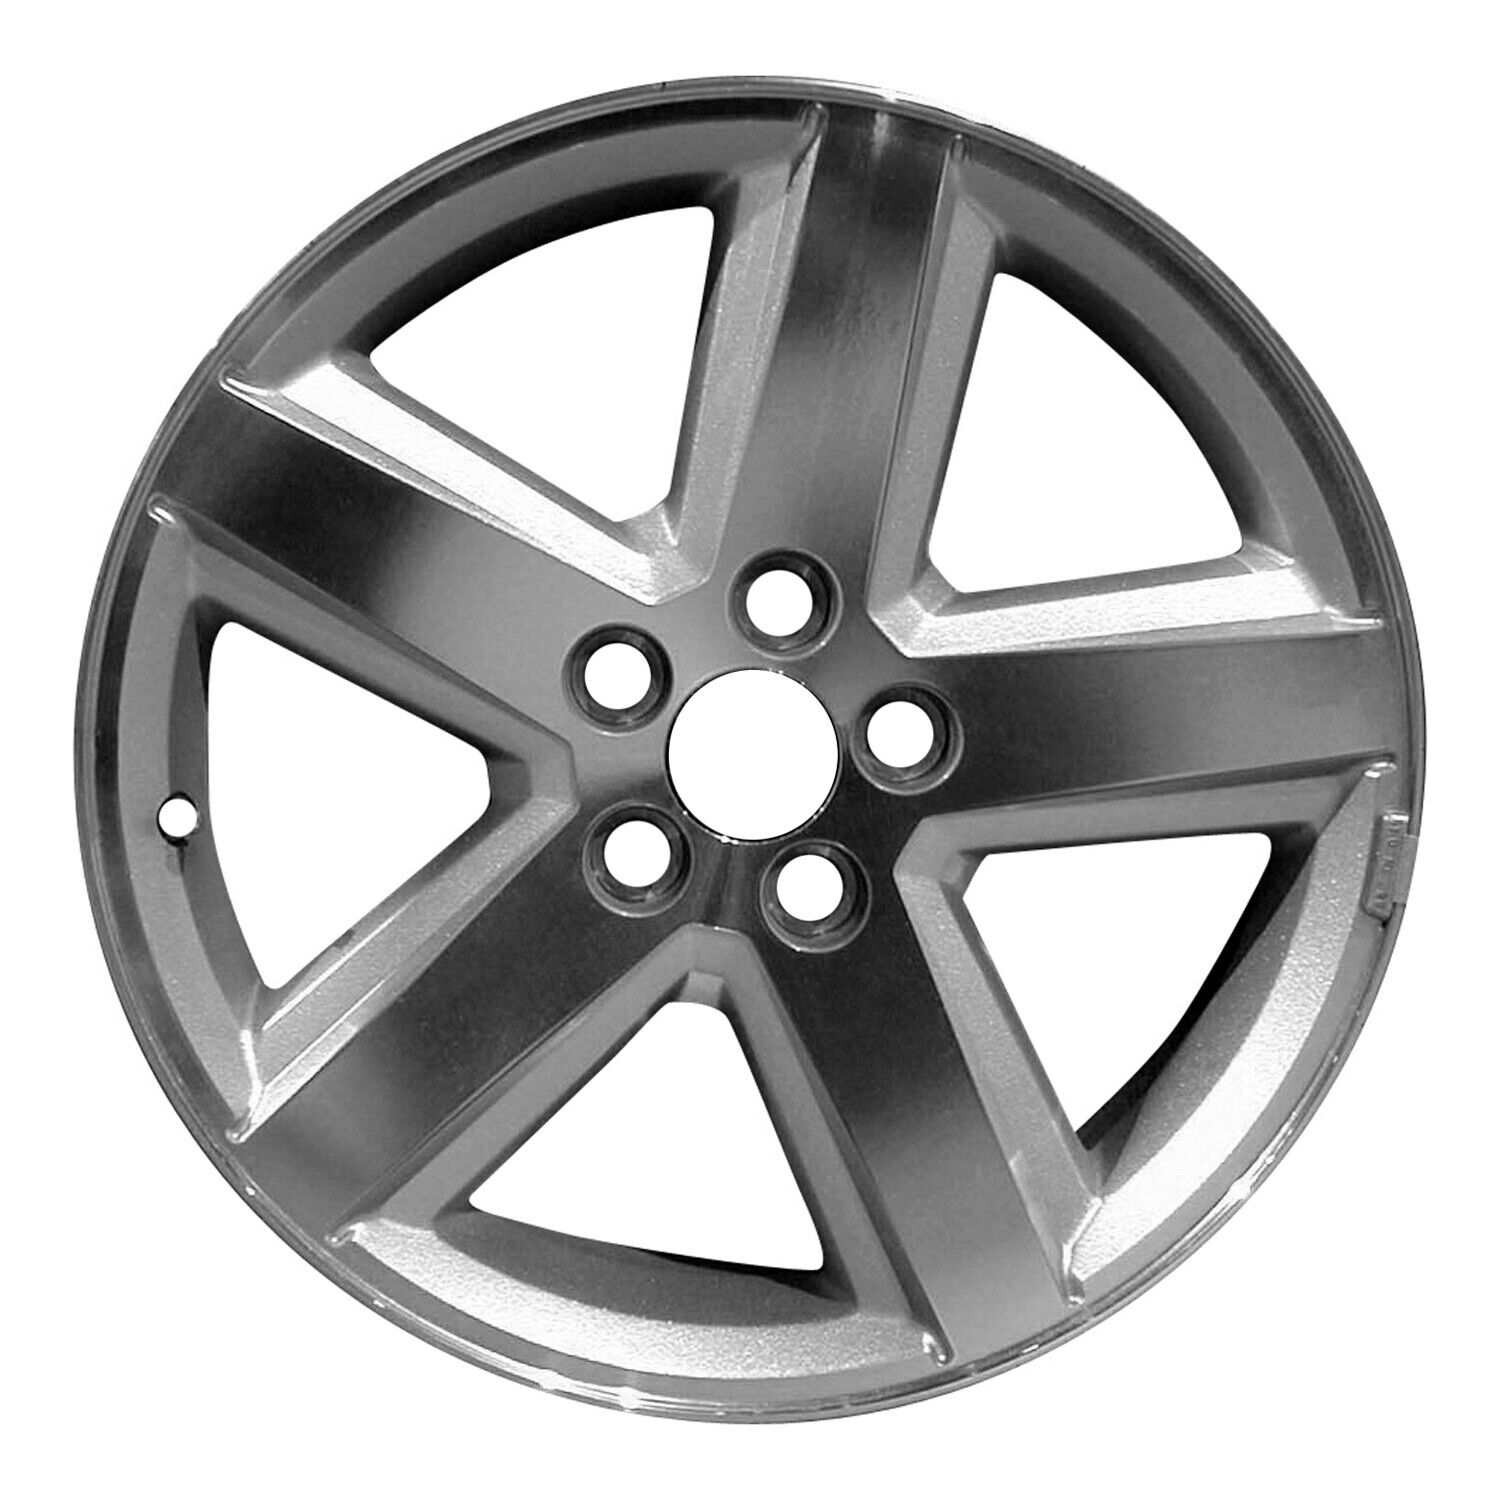 Reconditioned 18x7 Painted Bright Hypersilver Wheel fits 560-02309